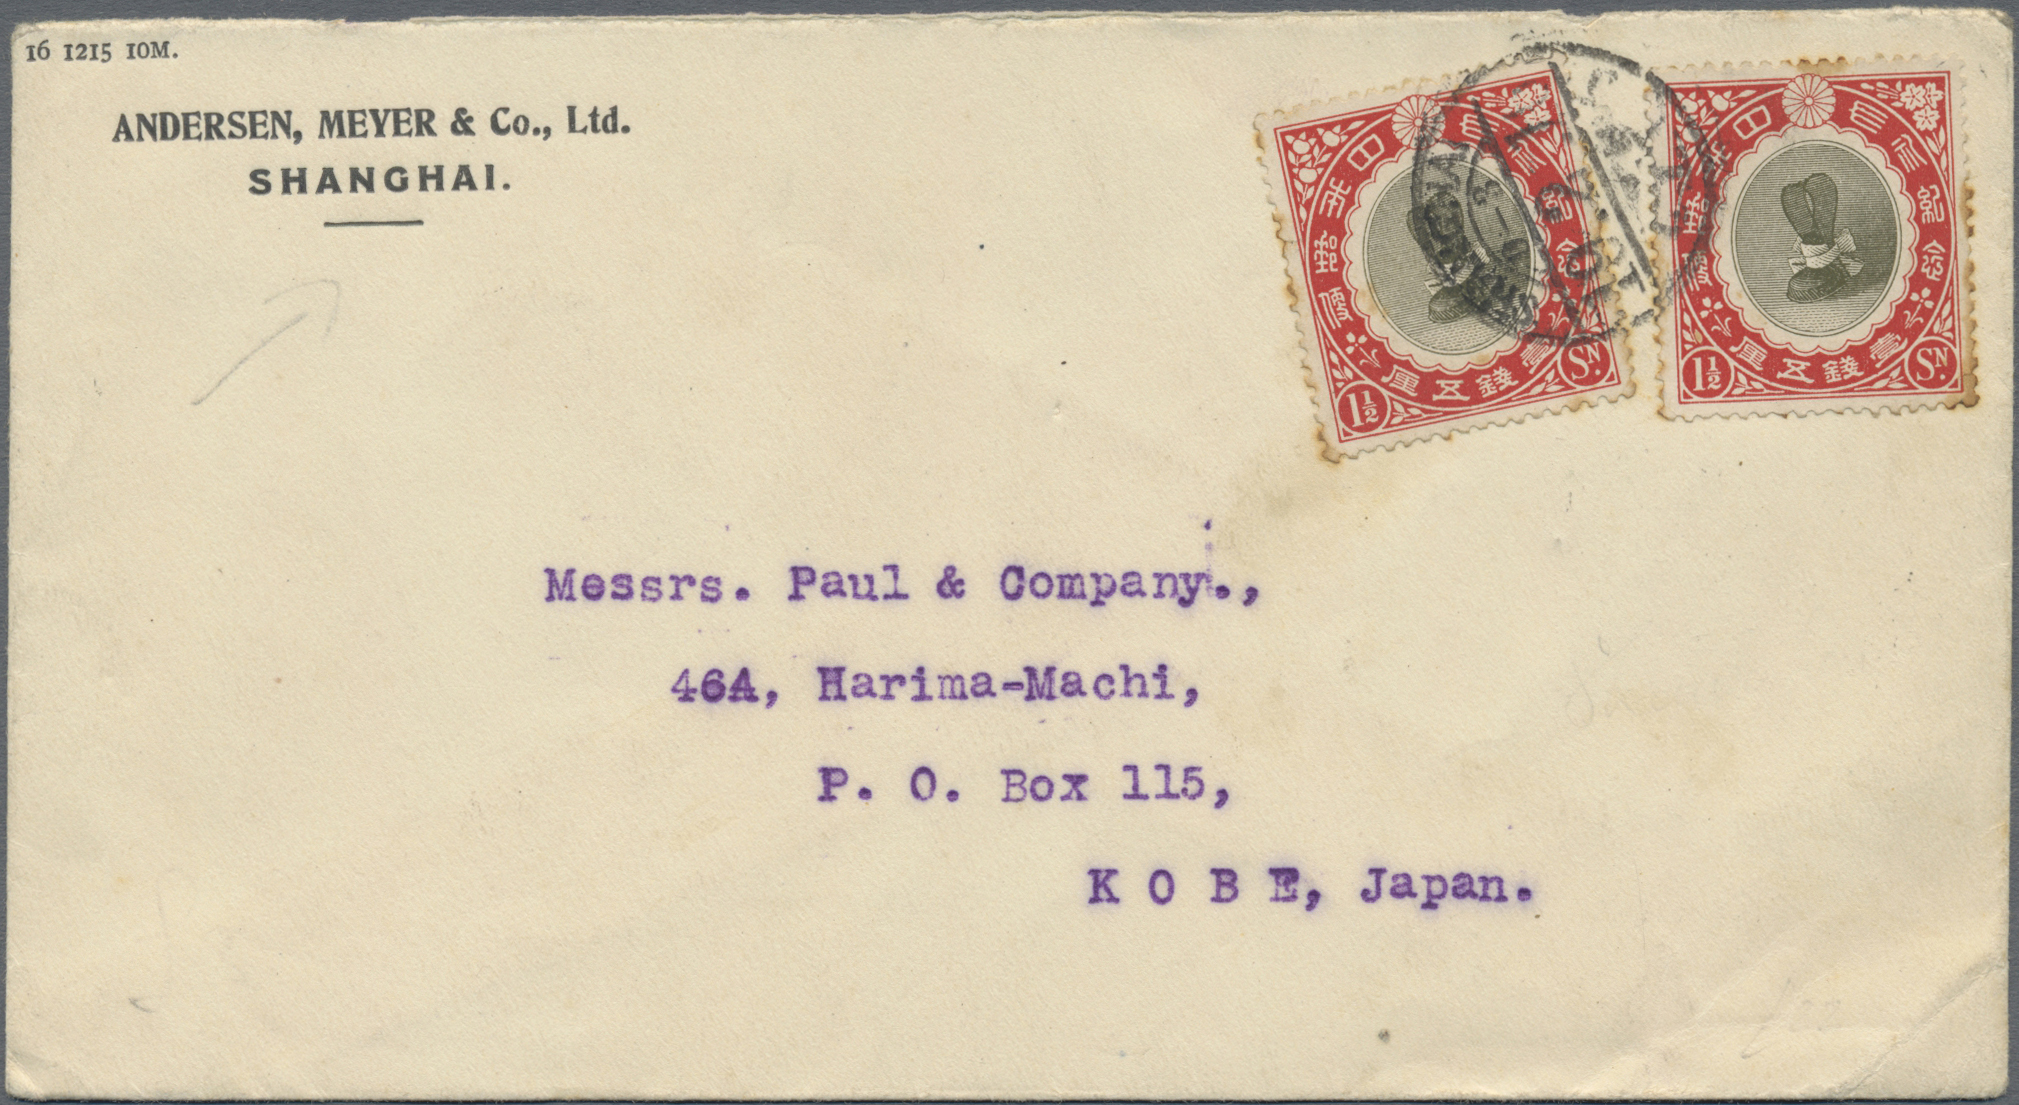 Lot 07436 - japanische post in china  -  Auktionshaus Christoph Gärtner GmbH & Co. KG 56th AUCTION - Day 4